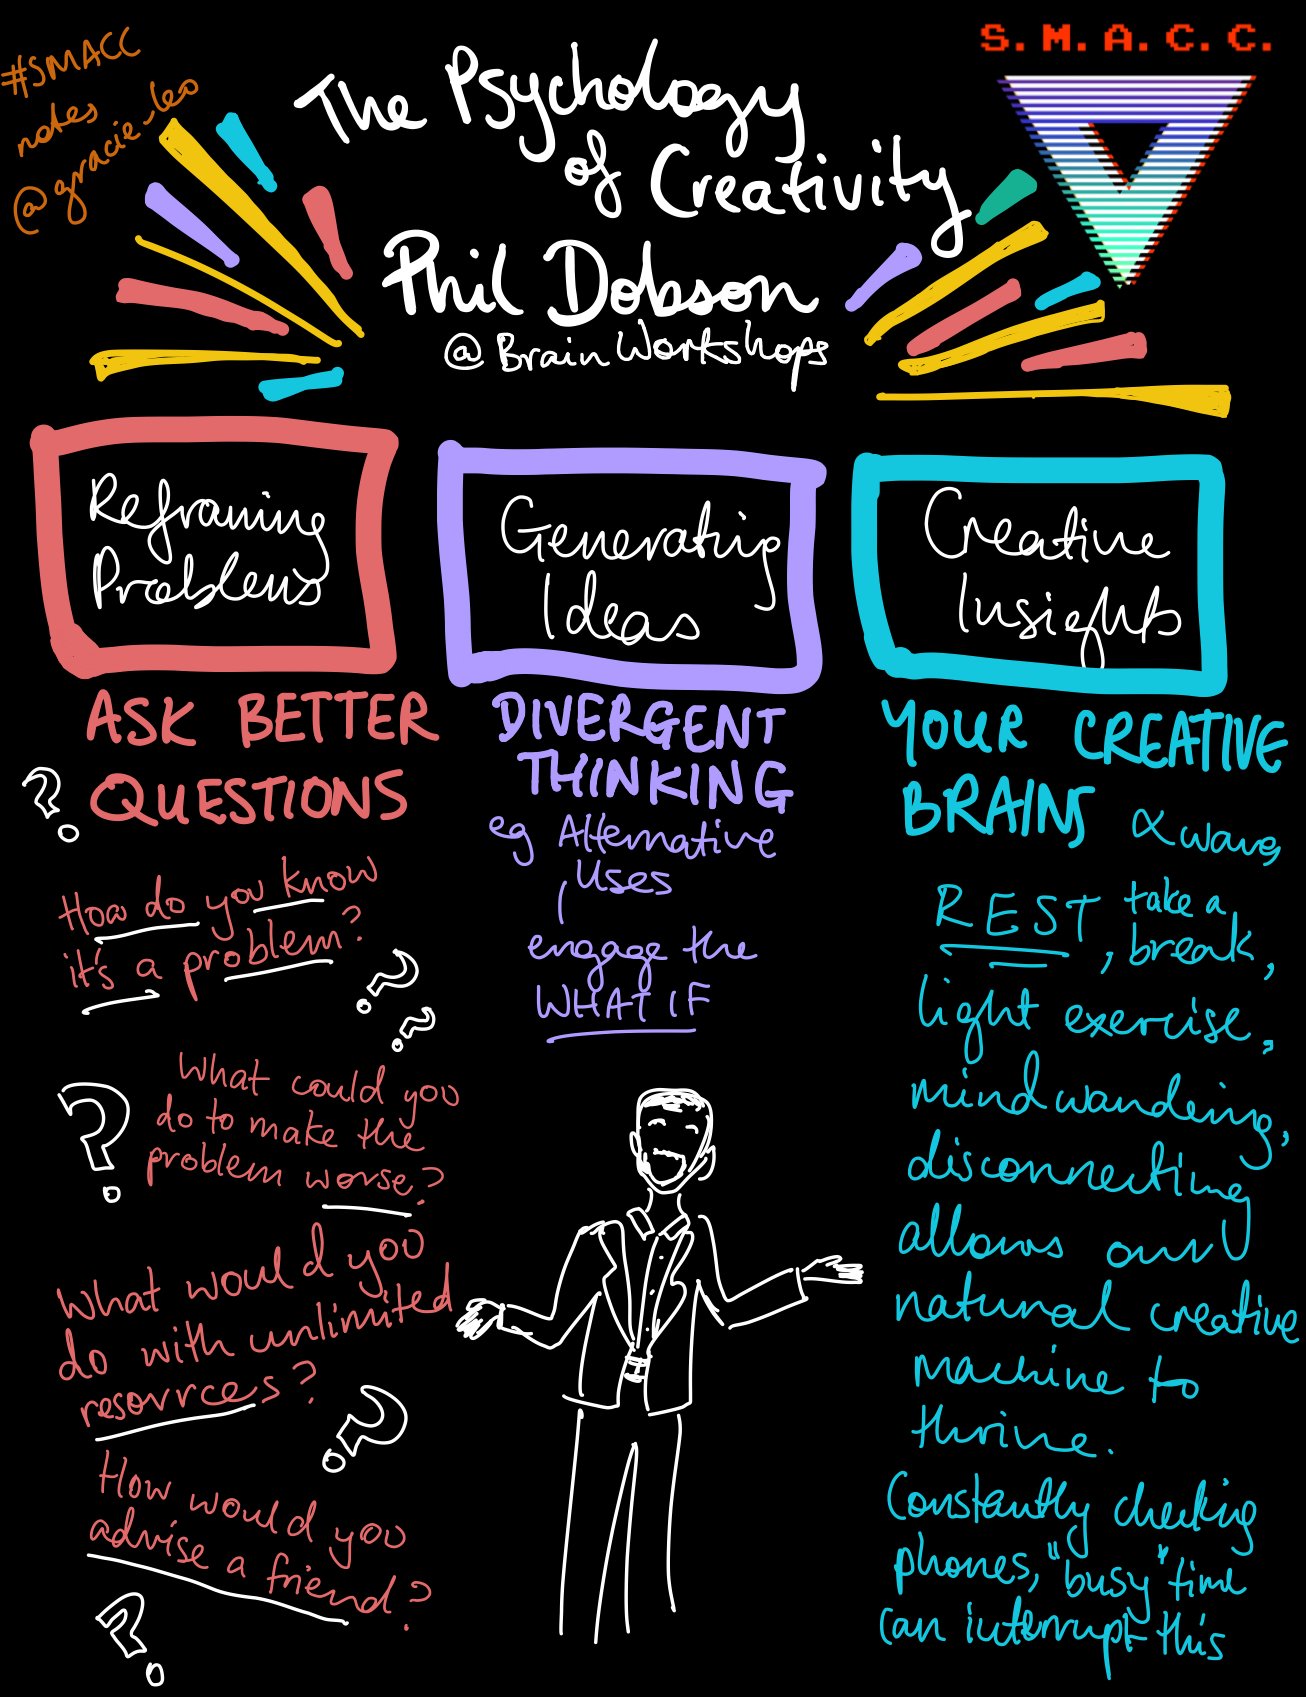 The Psychology of Creativity with Phil Dobson